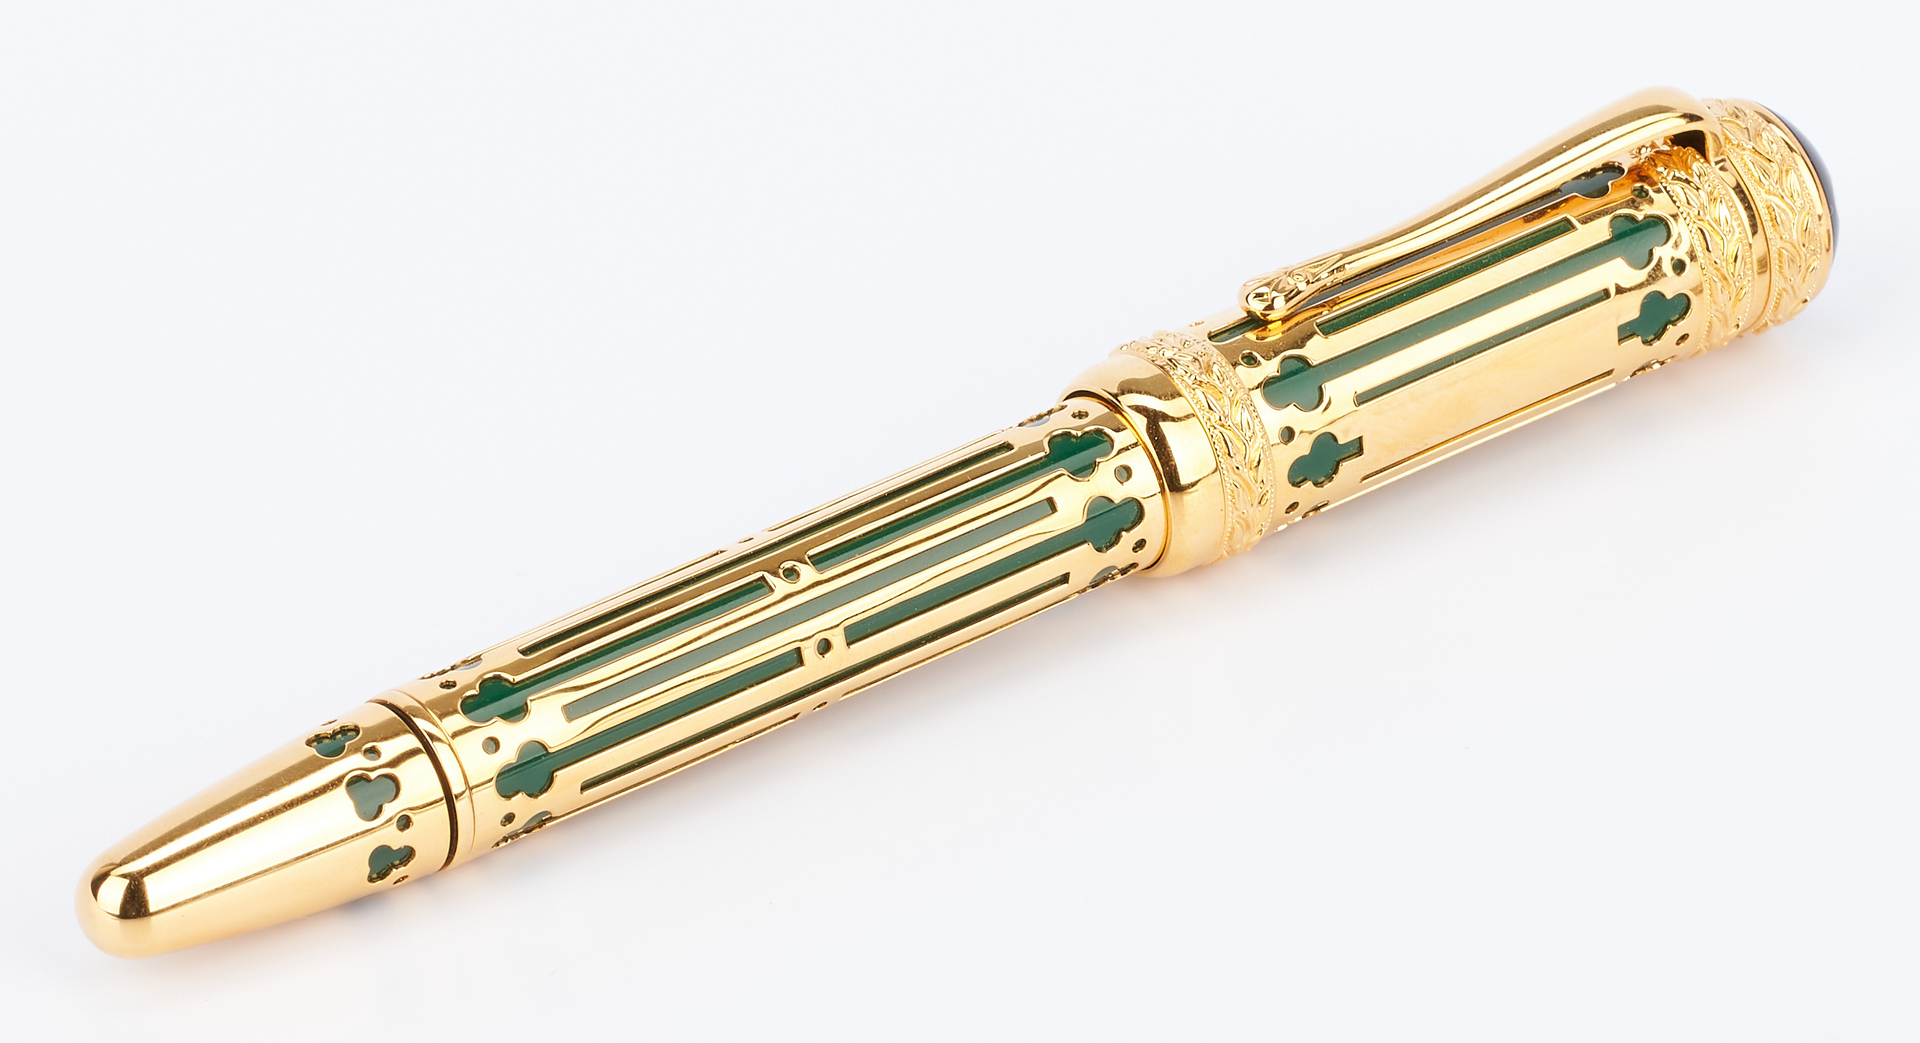 Lot 47: Montblanc Peter the Great 4810 Fountain Pen